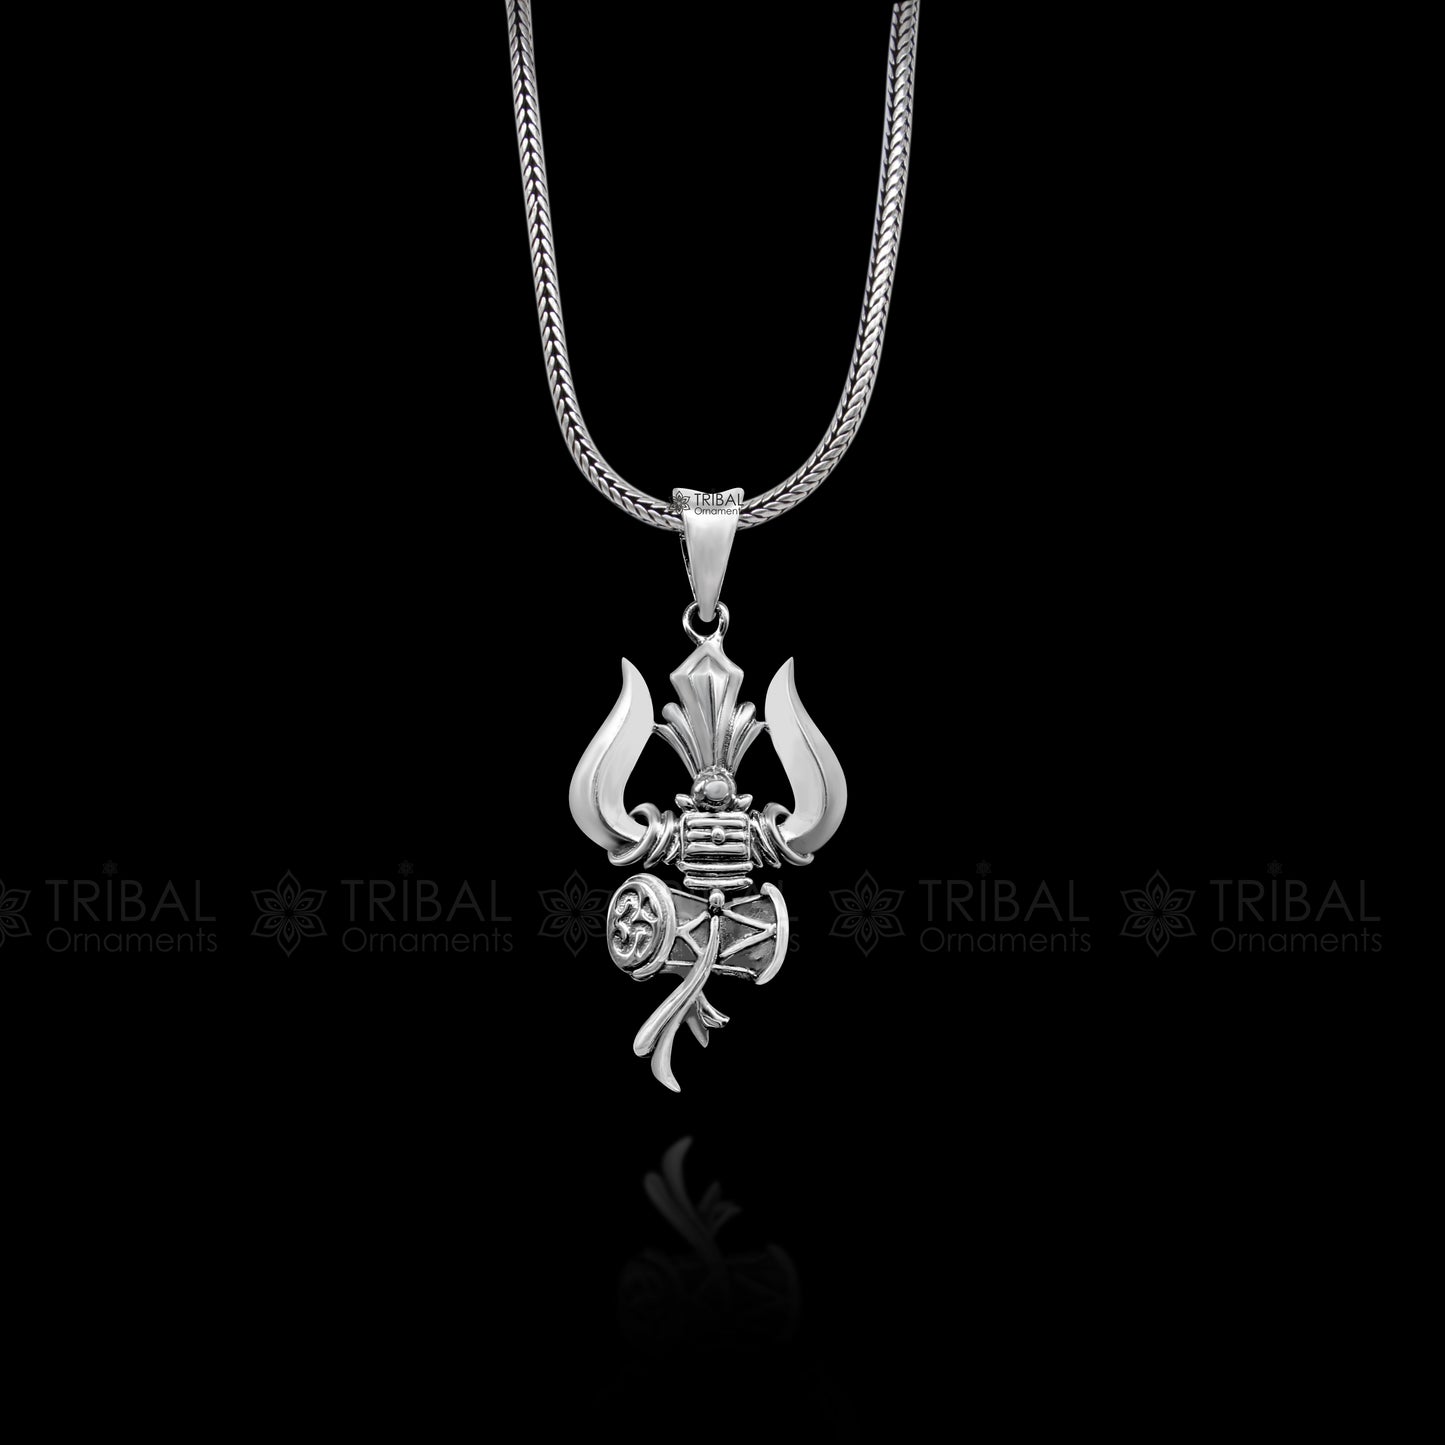 925 sterling silver Lord Shiva trident pendant, amazing vintage design god jewelry nsp787